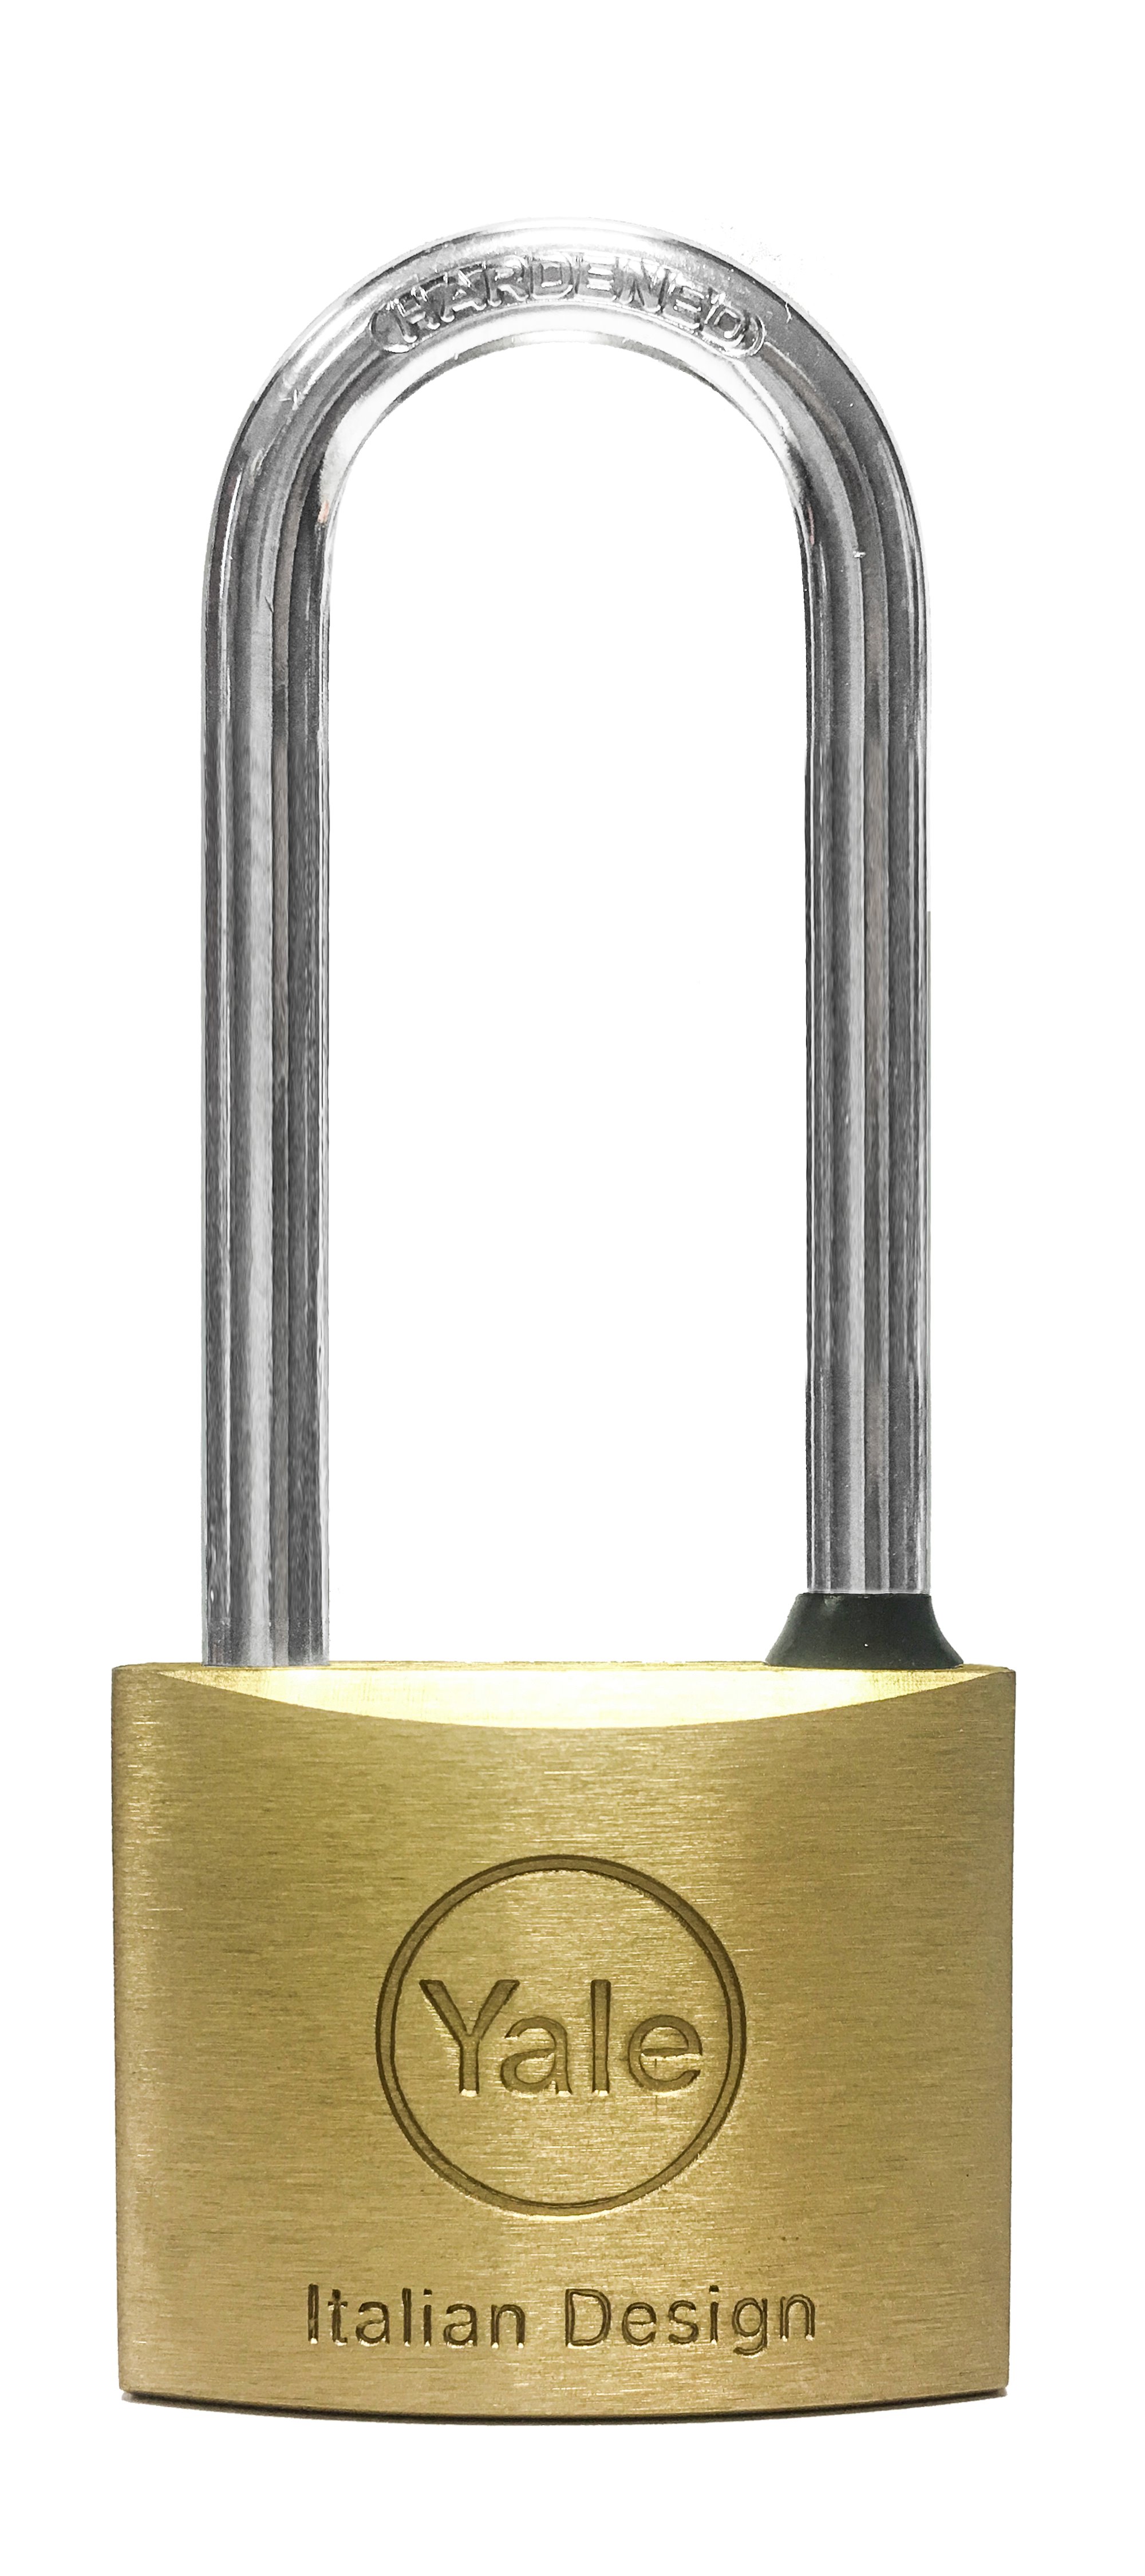 Global Industrial™ Brass Padlock With 3 Keys - Keyed Differently